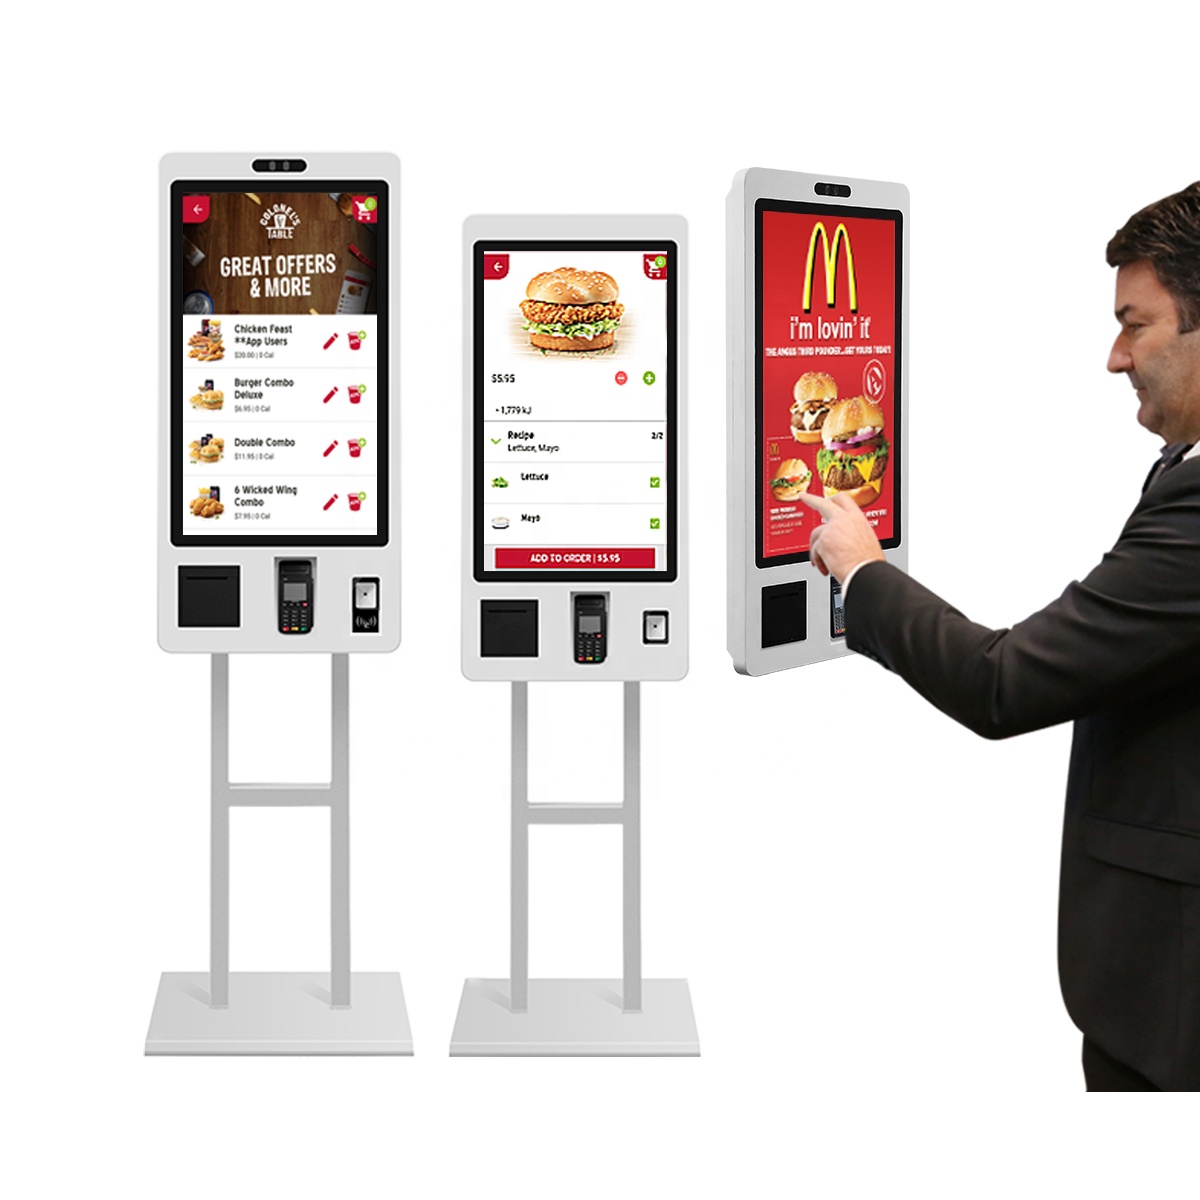 https://www.layson-display.com/32-inch-touch-screen-self-service-payment-ordering-kiosk-for-fast-food-mcdonaldskfcrestaurantsupermarket-product/